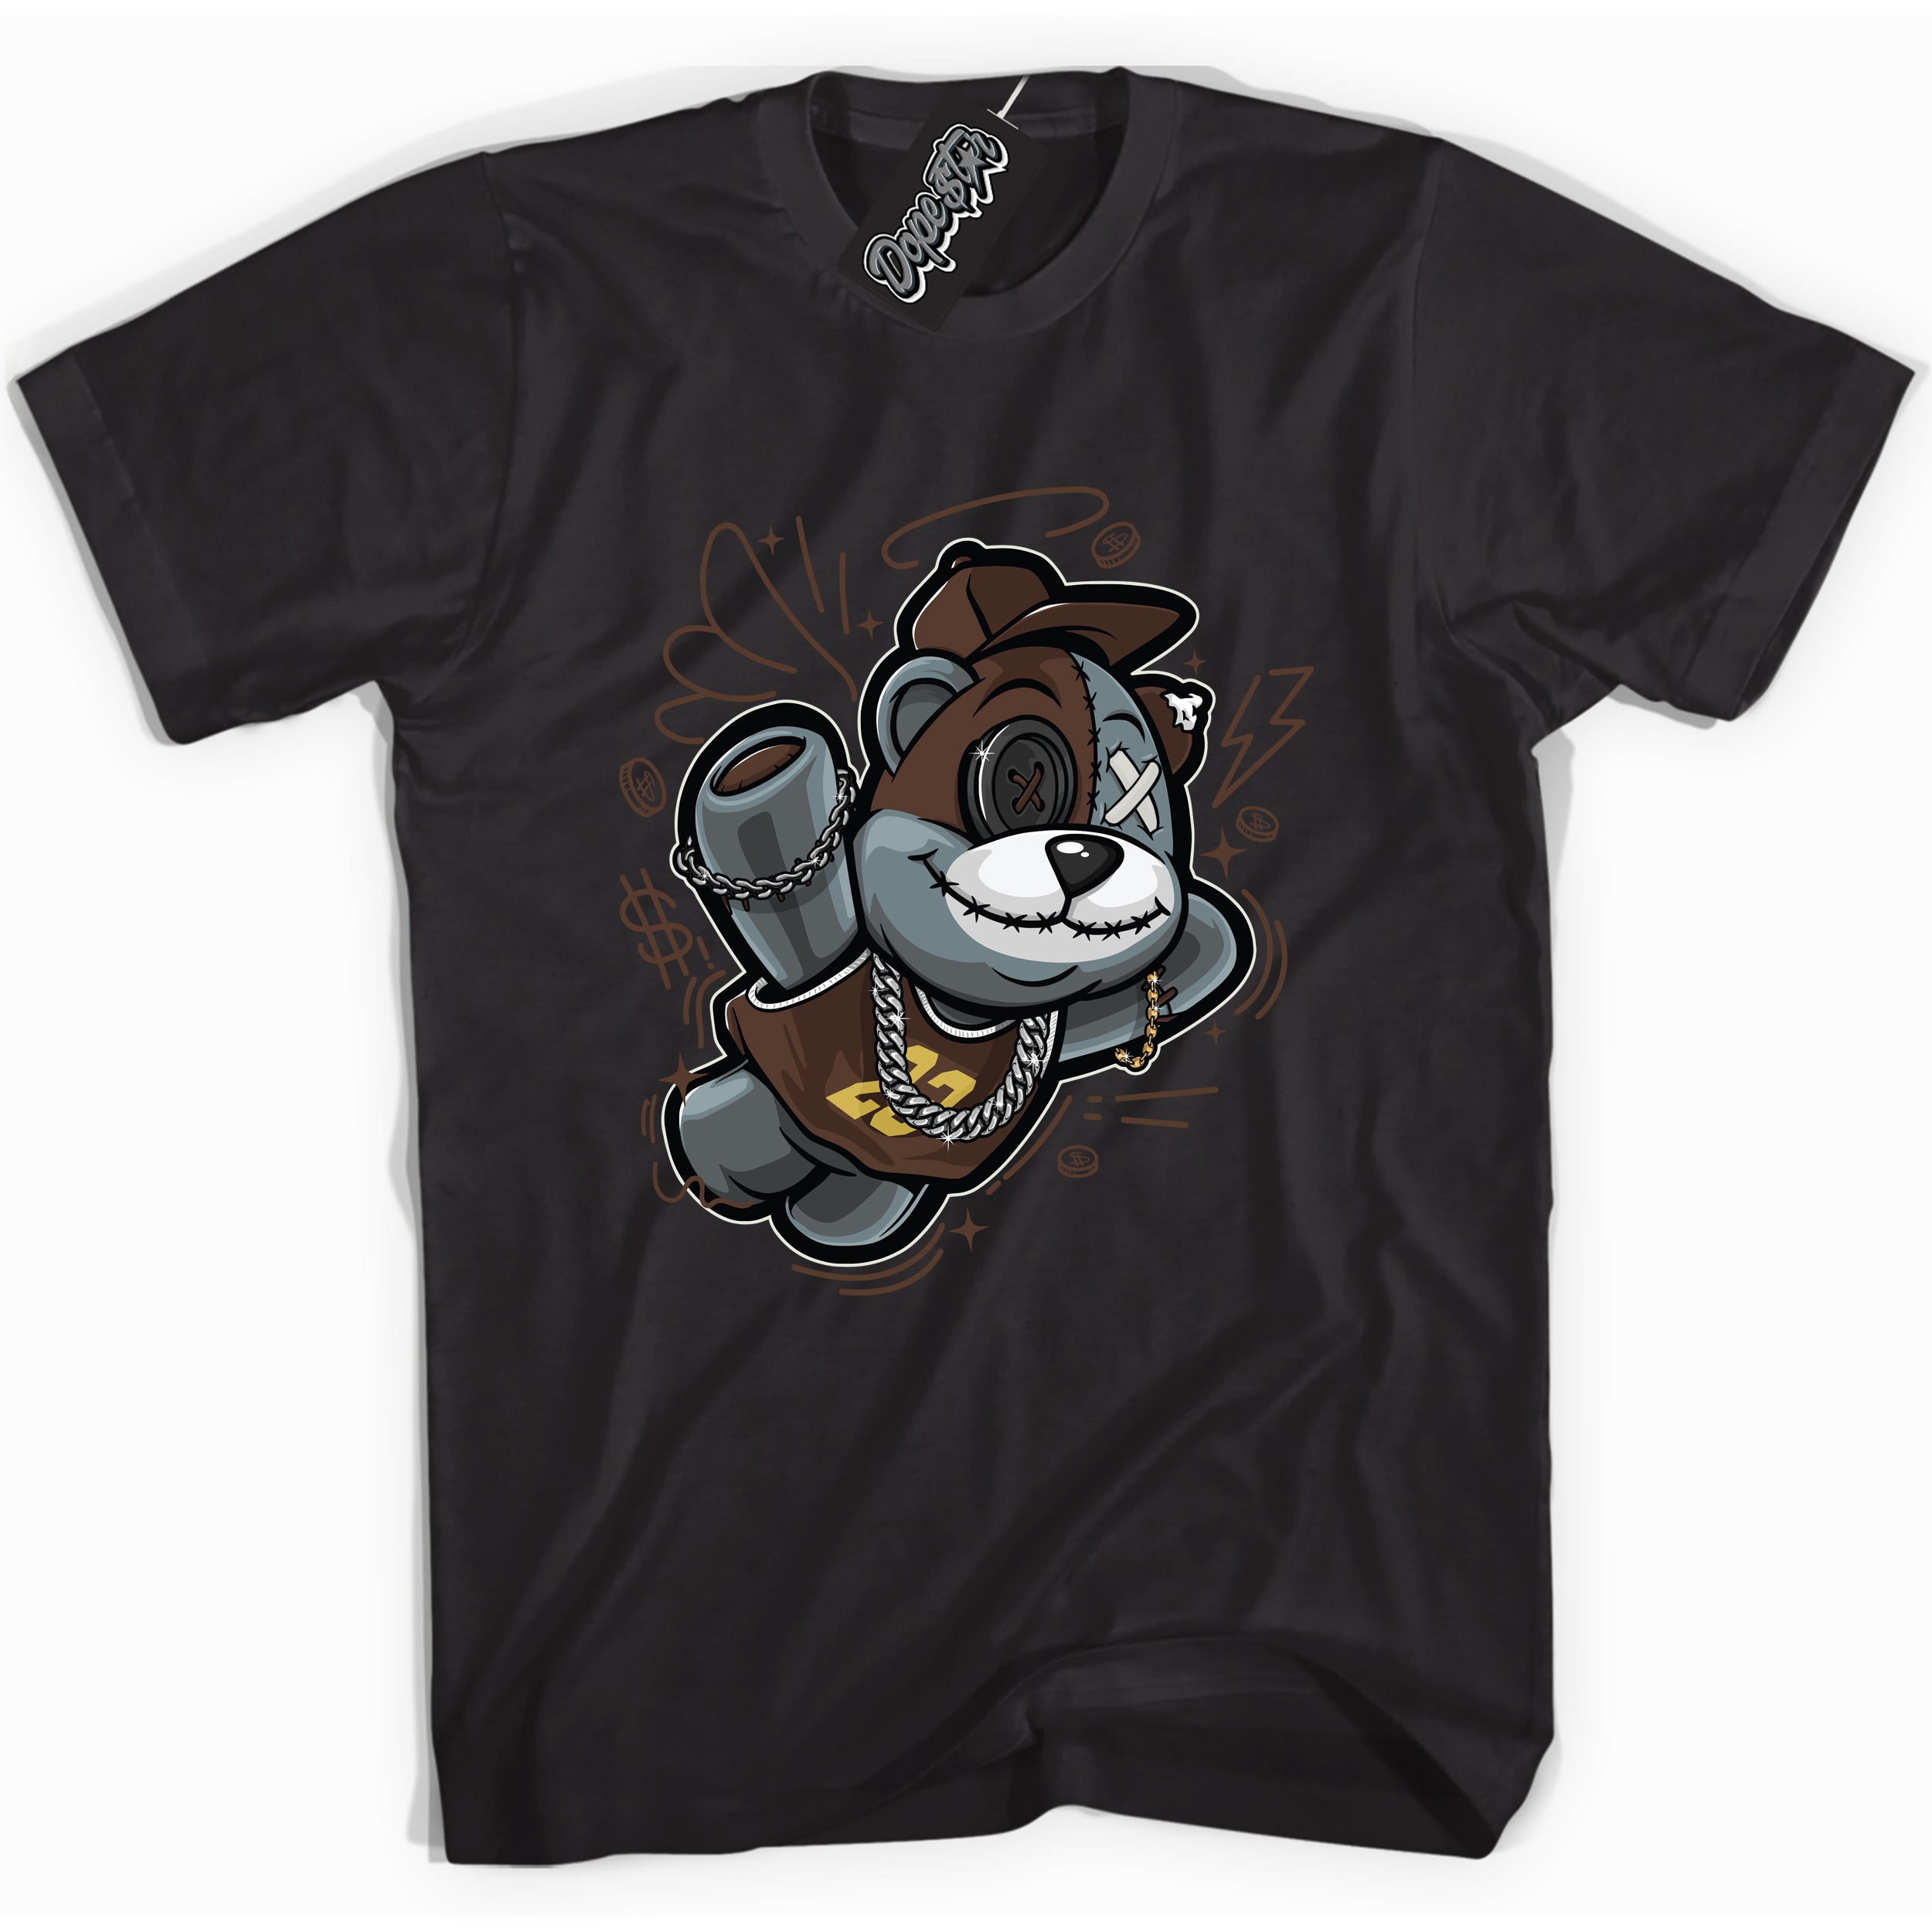 Cool Black graphic tee with “ Slam Dunk Bear ” design, that perfectly matches Palomino 1s sneakers 